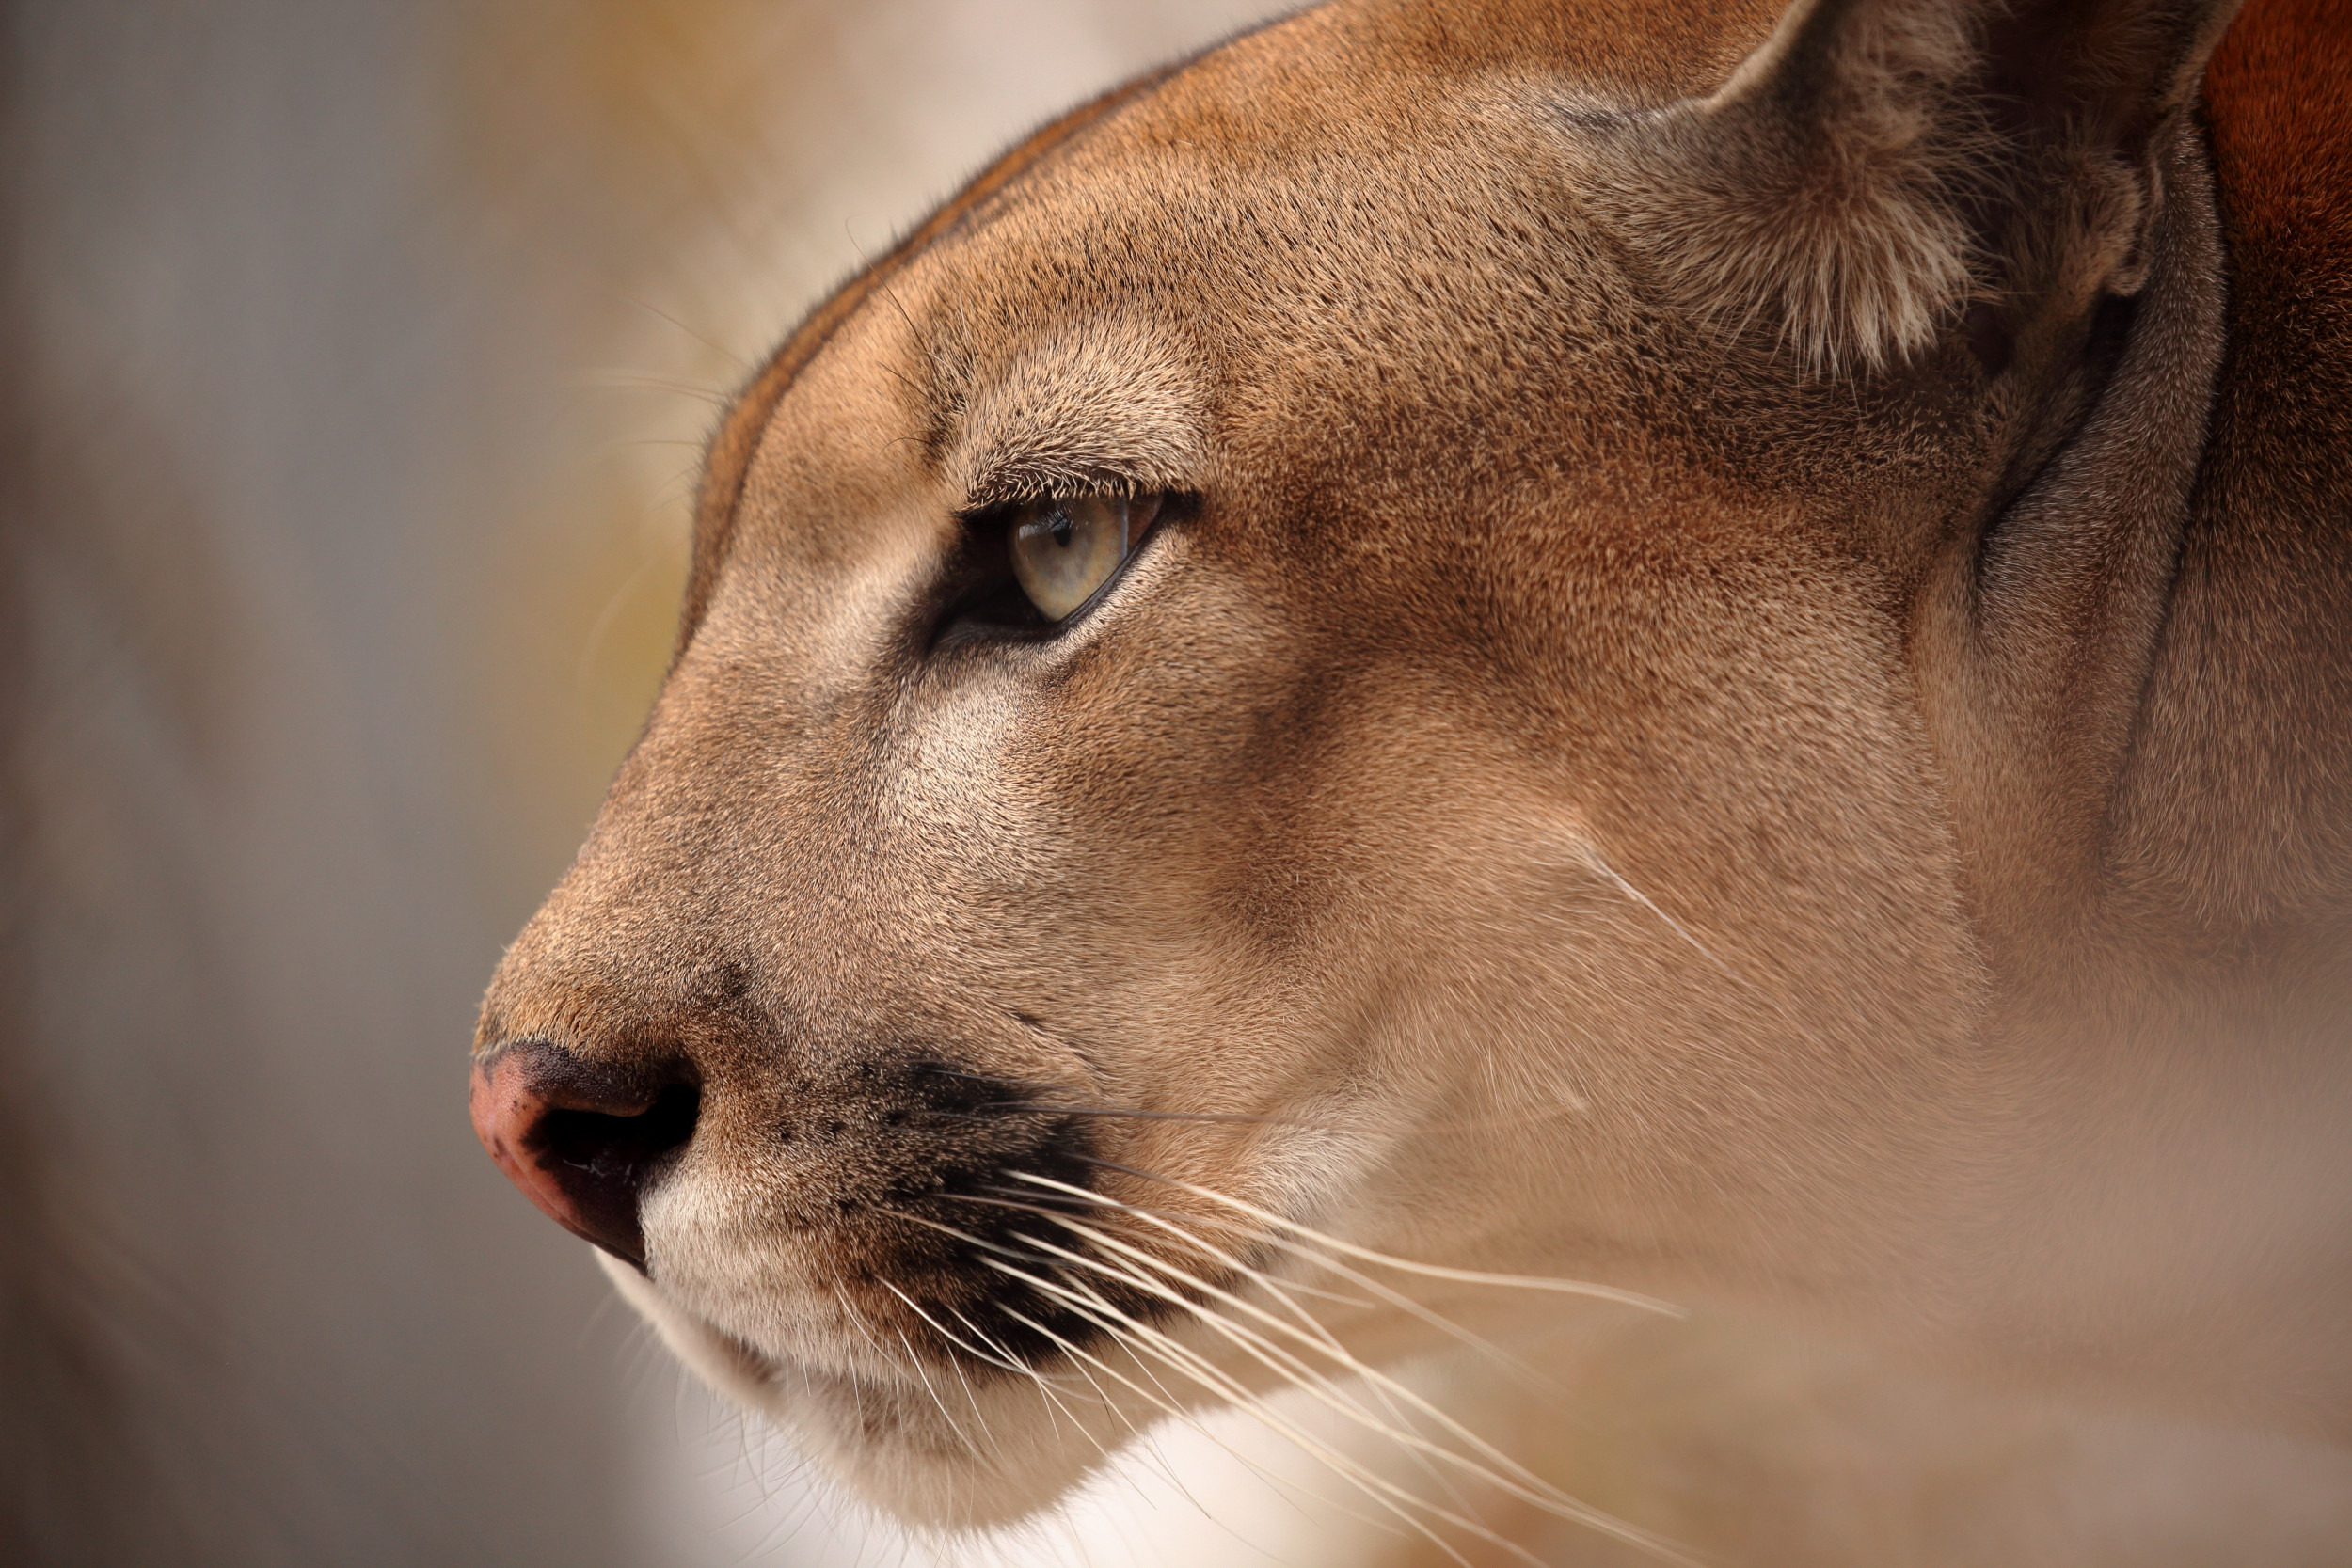 Terrified California Mom Finds Mountain Lion Cornering Her Son, 4, on Deck